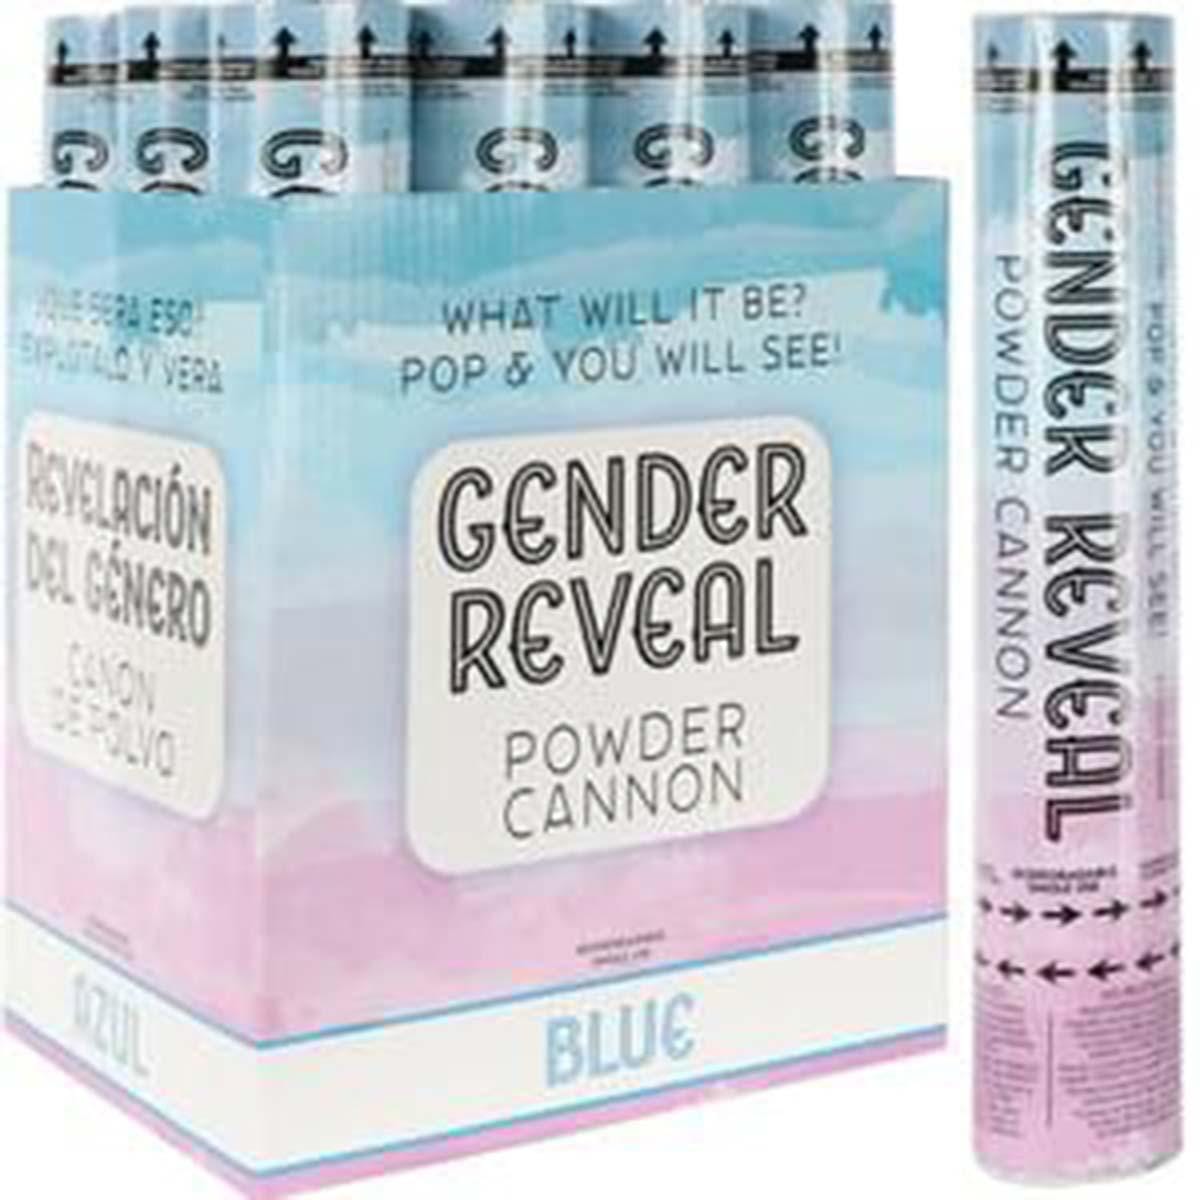 Buy Baby Shower Gender reveal blue powder cannon sold at Party Expert